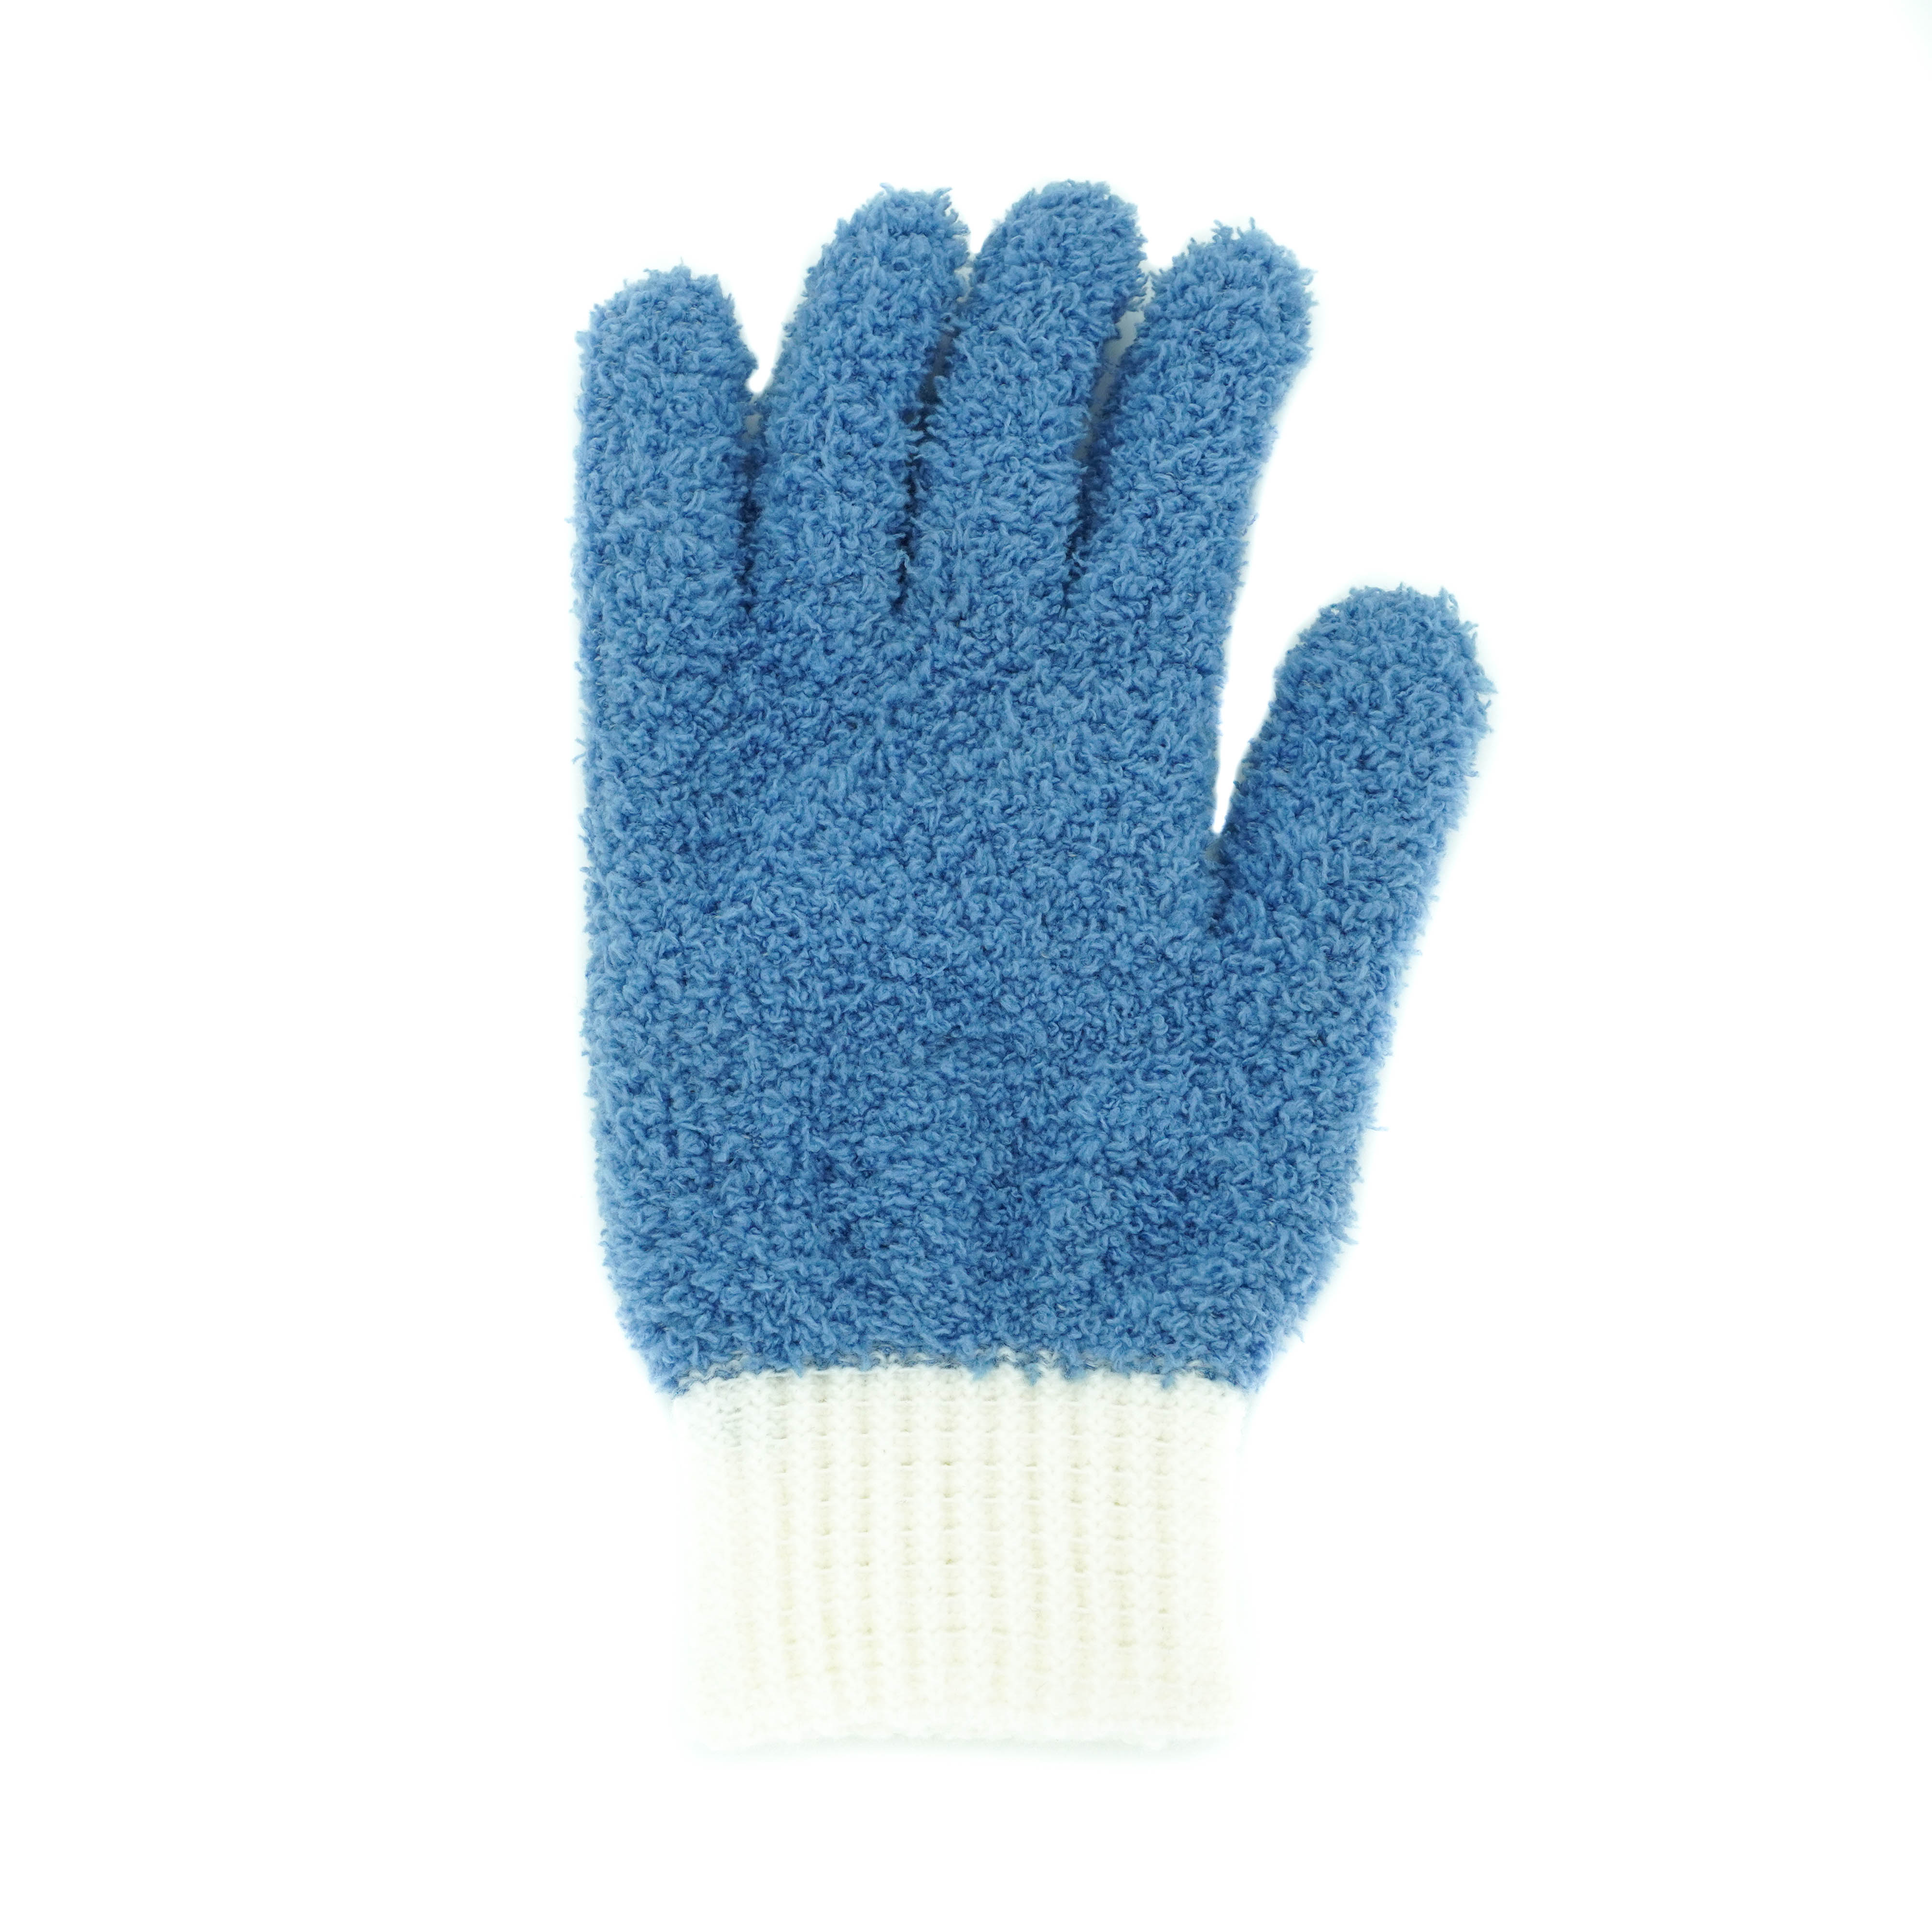 Hot New Products Wash Mitts Microfiber - Microfiber Auto Dusting Cleaning Gloves for Cars and Trucks, Dust Cleaning Gloves for House Cleaning, Perfect to Clean Mirrors, Lamps and Blinds – We...